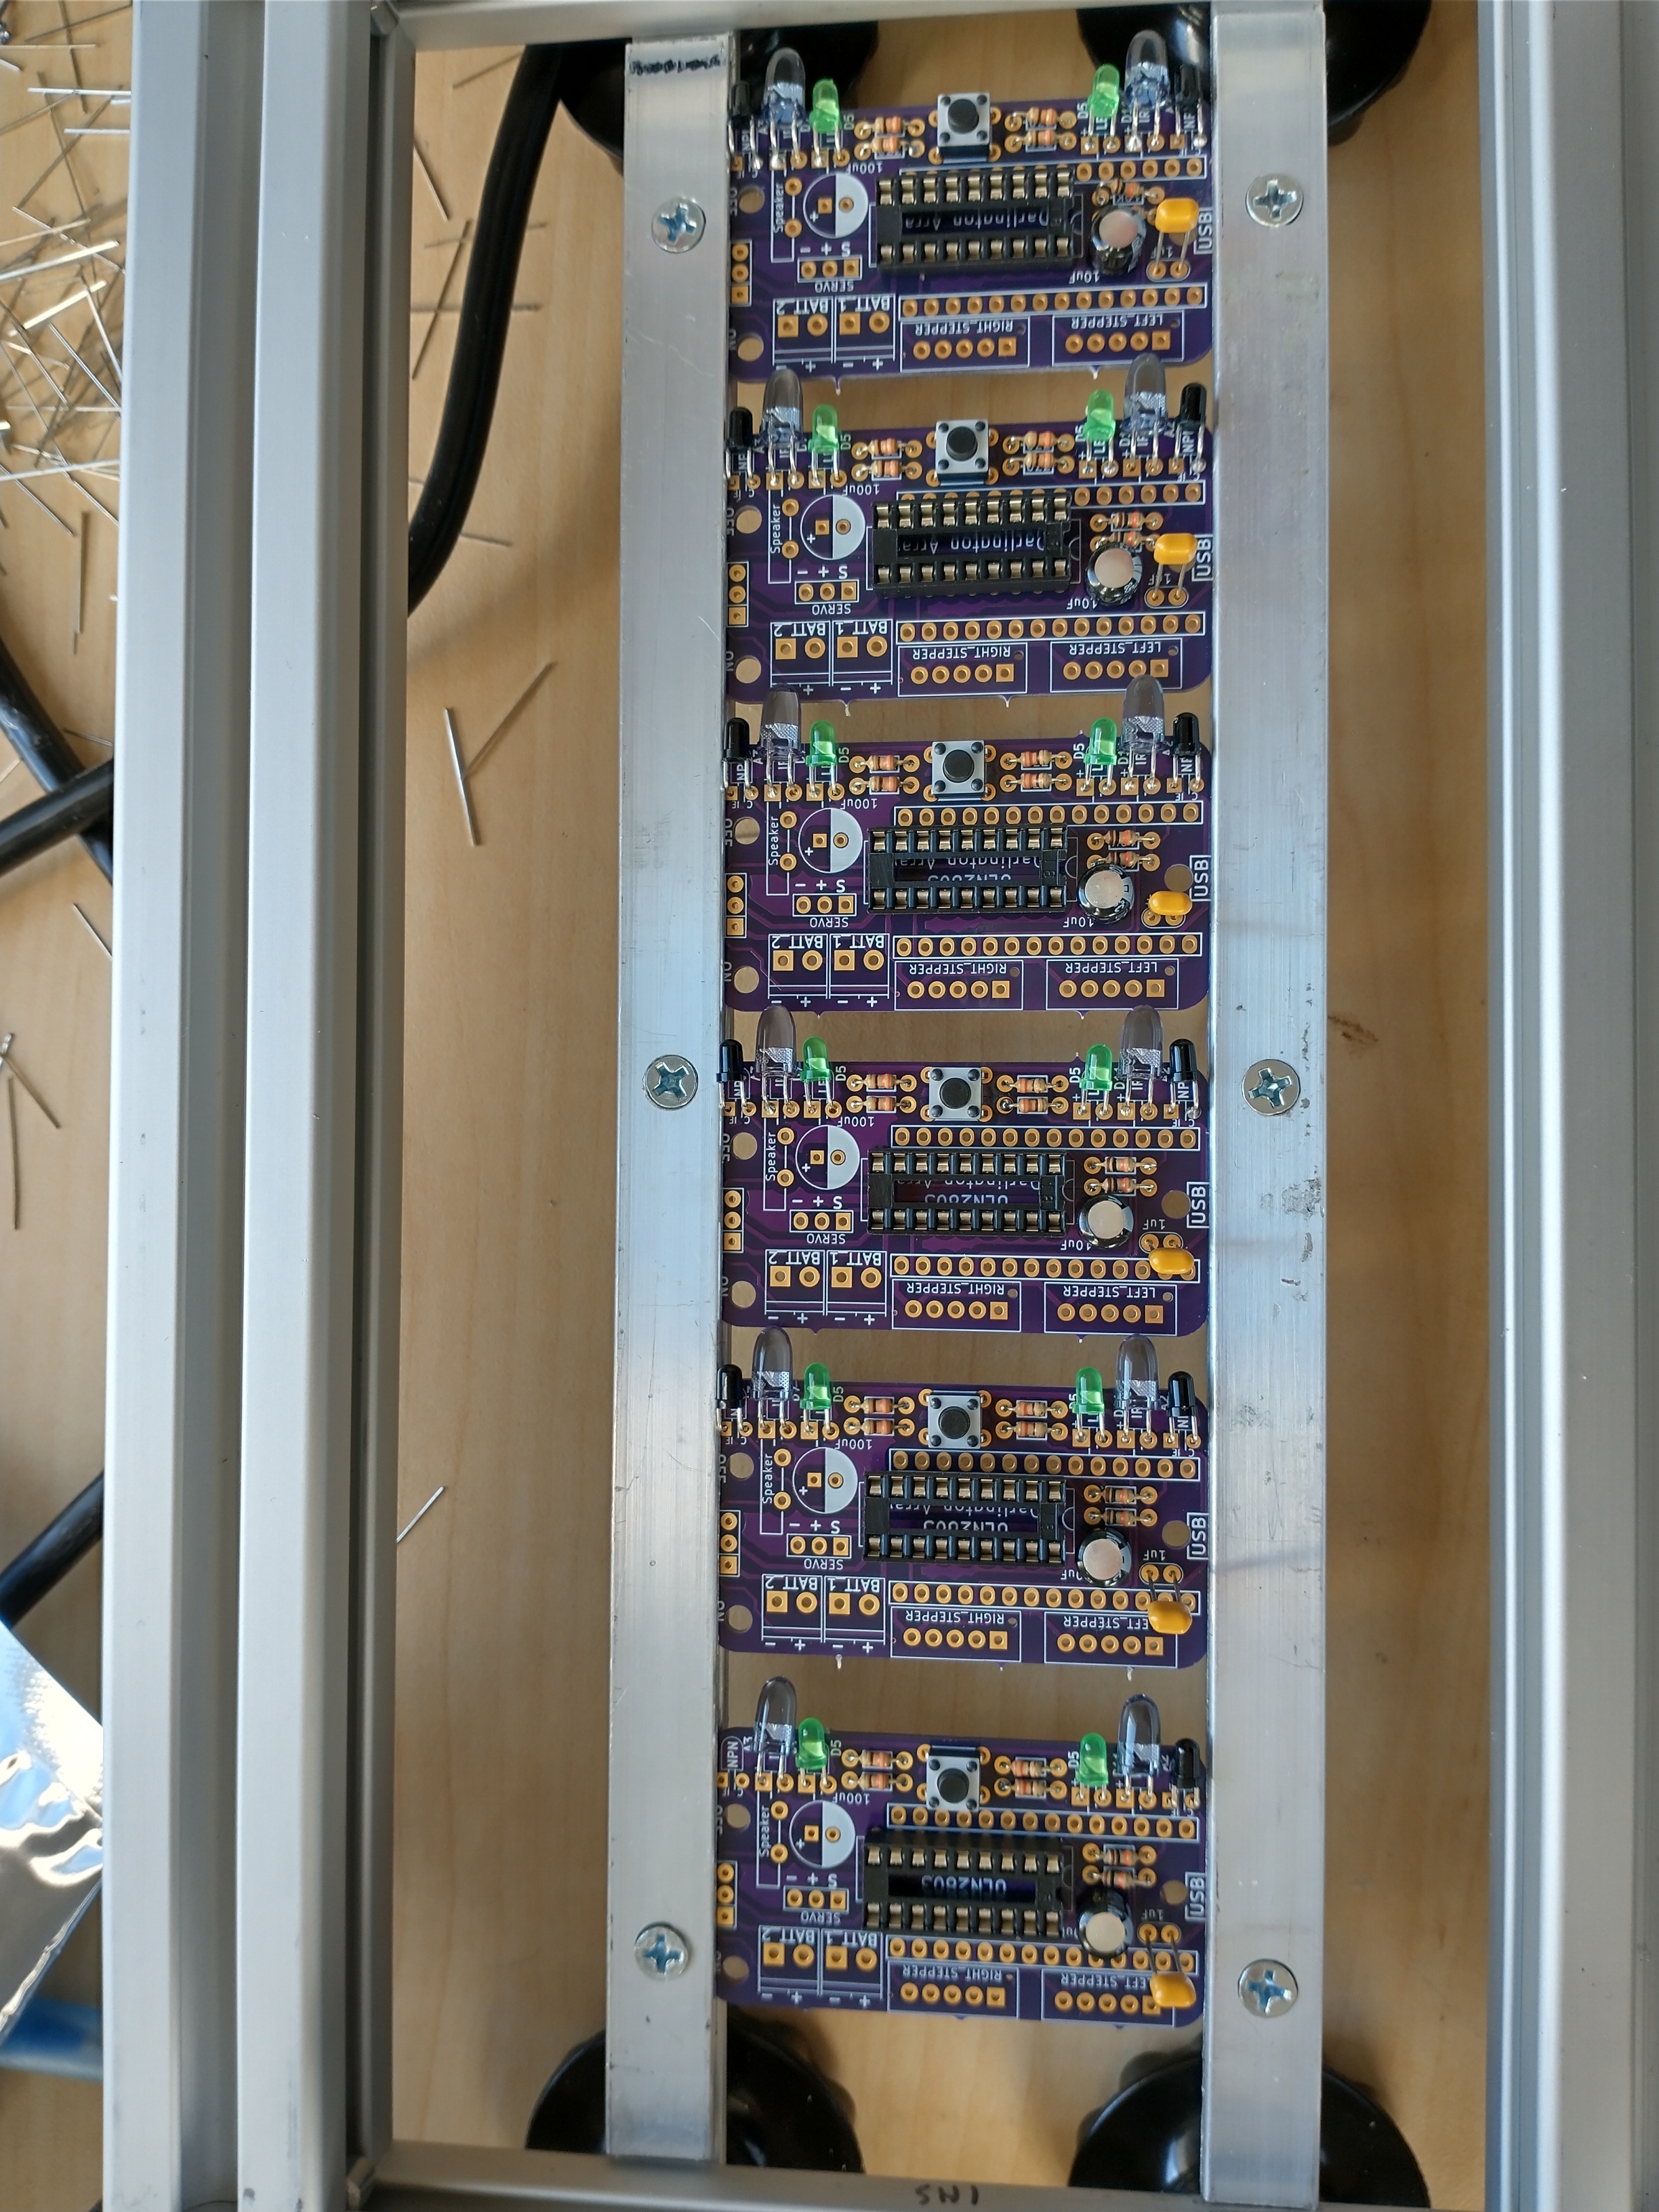 Image of the fixture with 6 PCBs partially assembled.